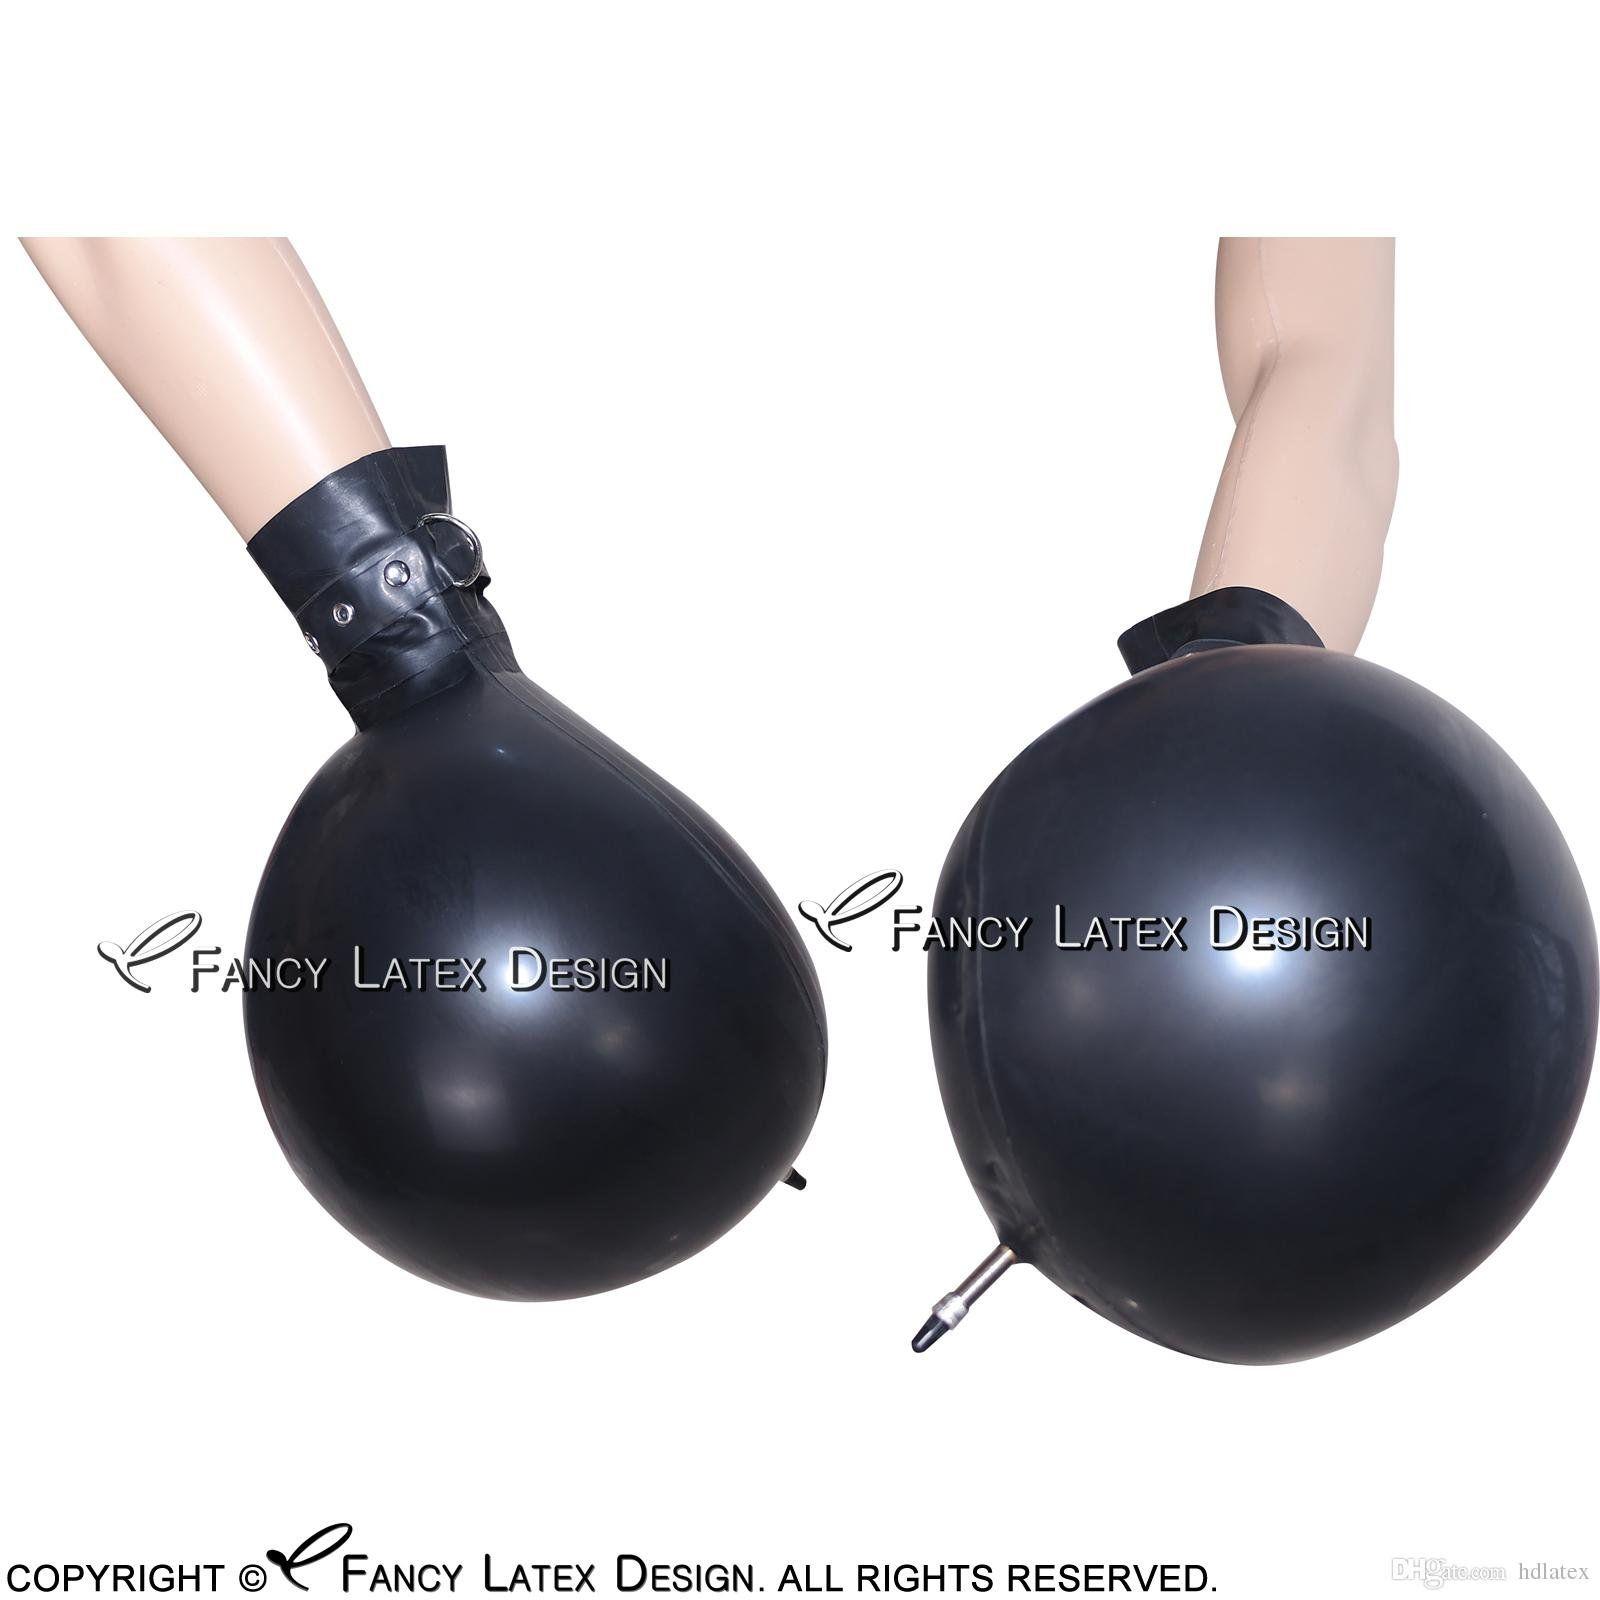 Manhattan reccomend Inflateable fetish ball